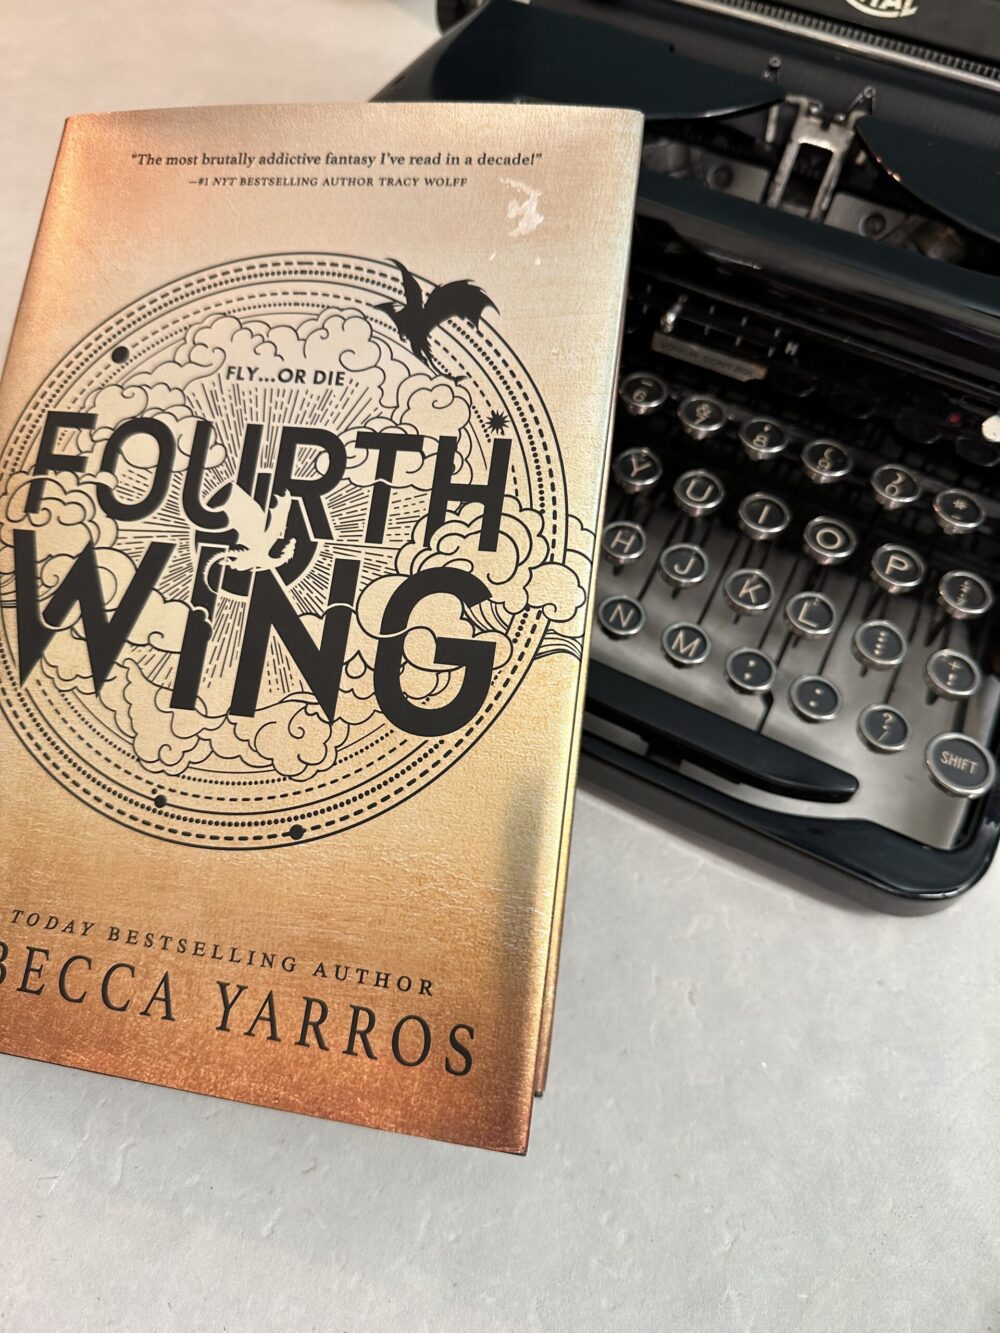 Fourth Wing Book and an Old Typewriter